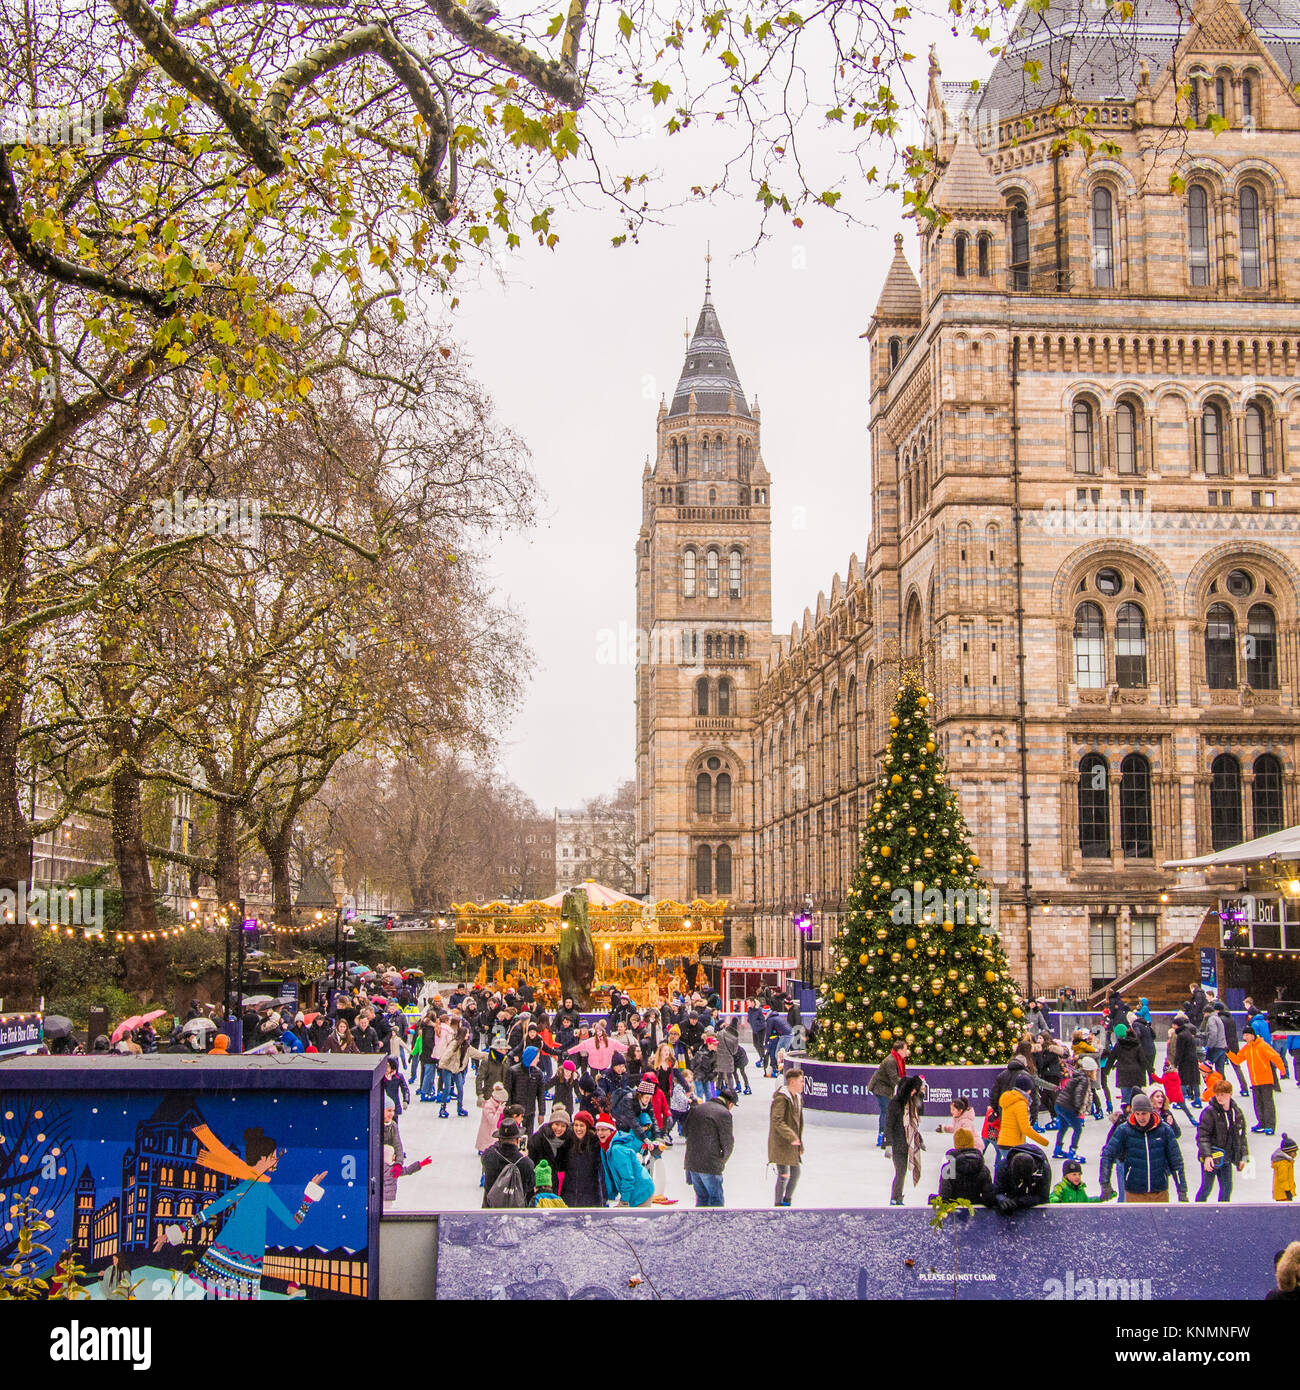 Festive fun at the National History Museum Ice Rink, London. Stock Photo